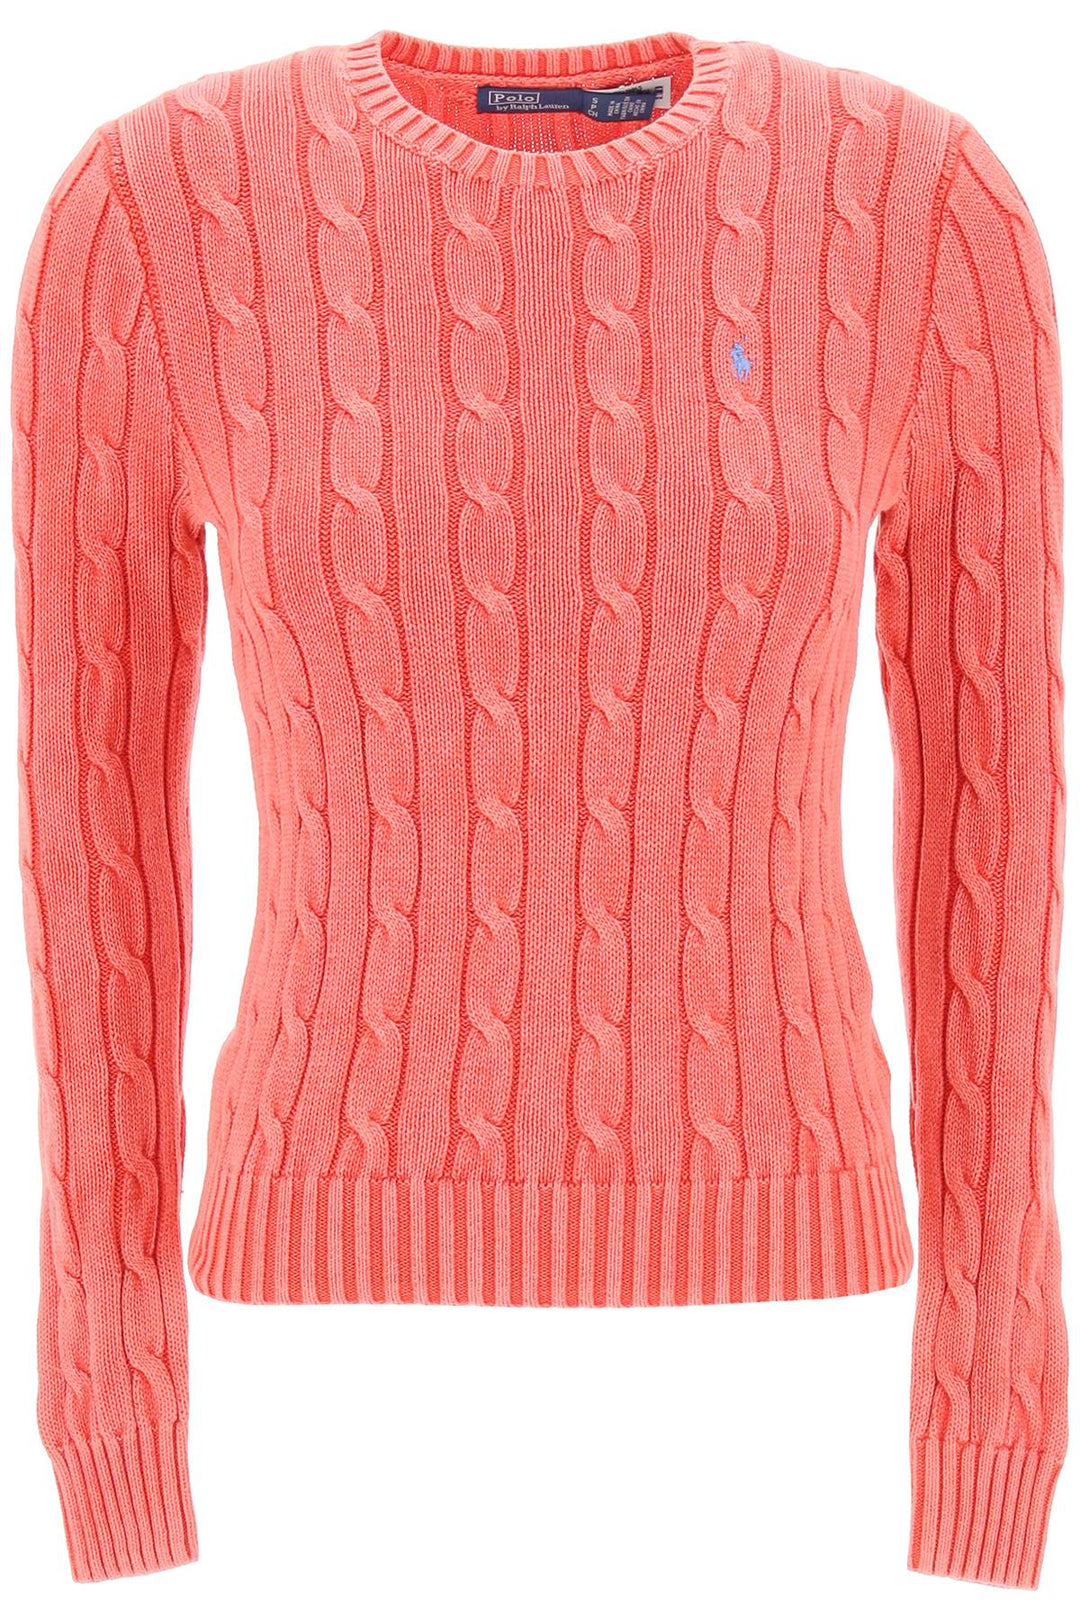 Polo Ralph Lauren Cotton Cable Knit Pullover Sweater   Rosa